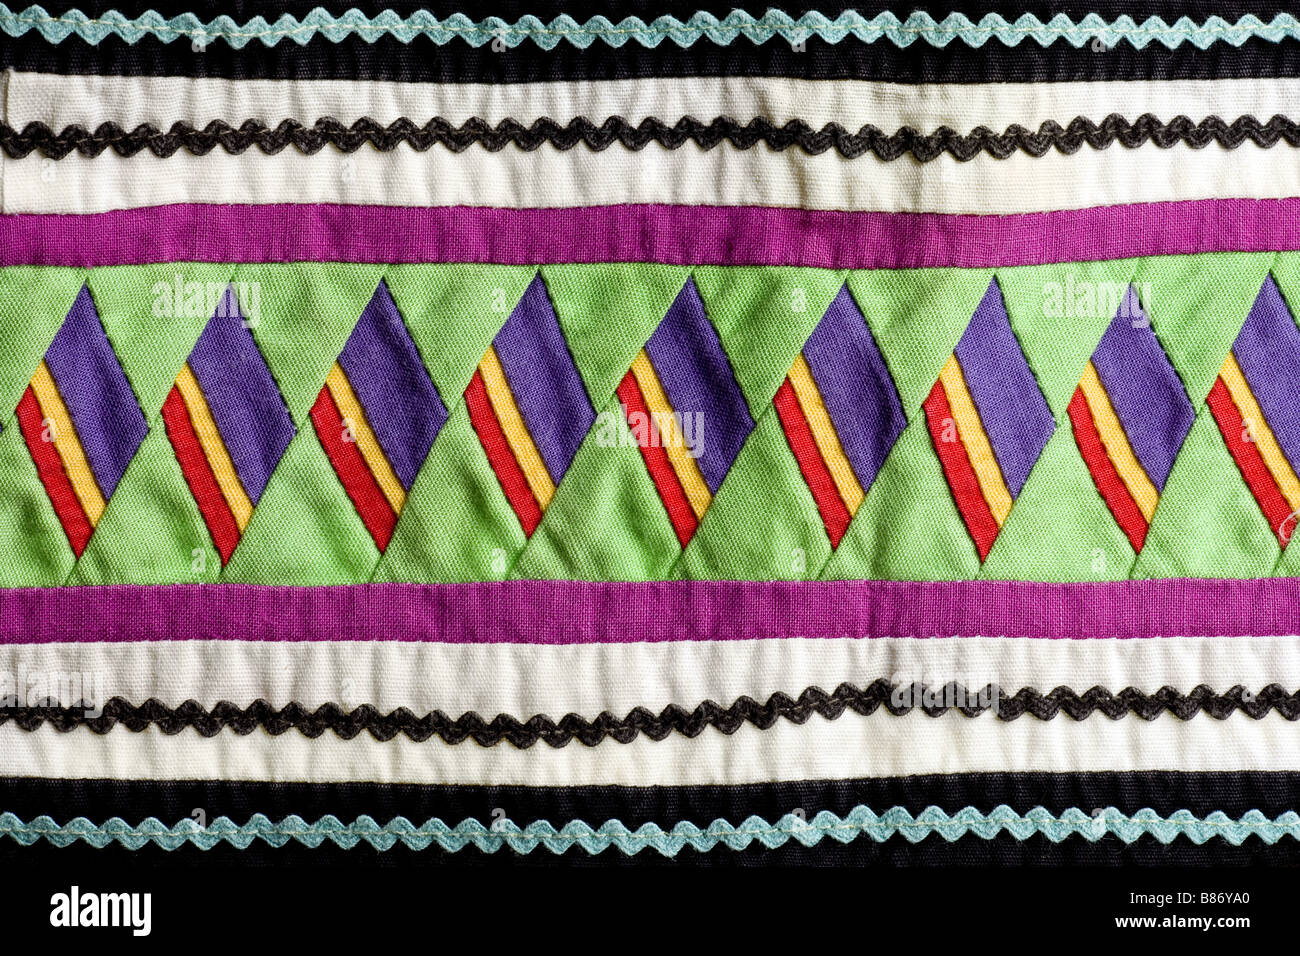 Native American Seminole handmade quilted patterns Stock Photo